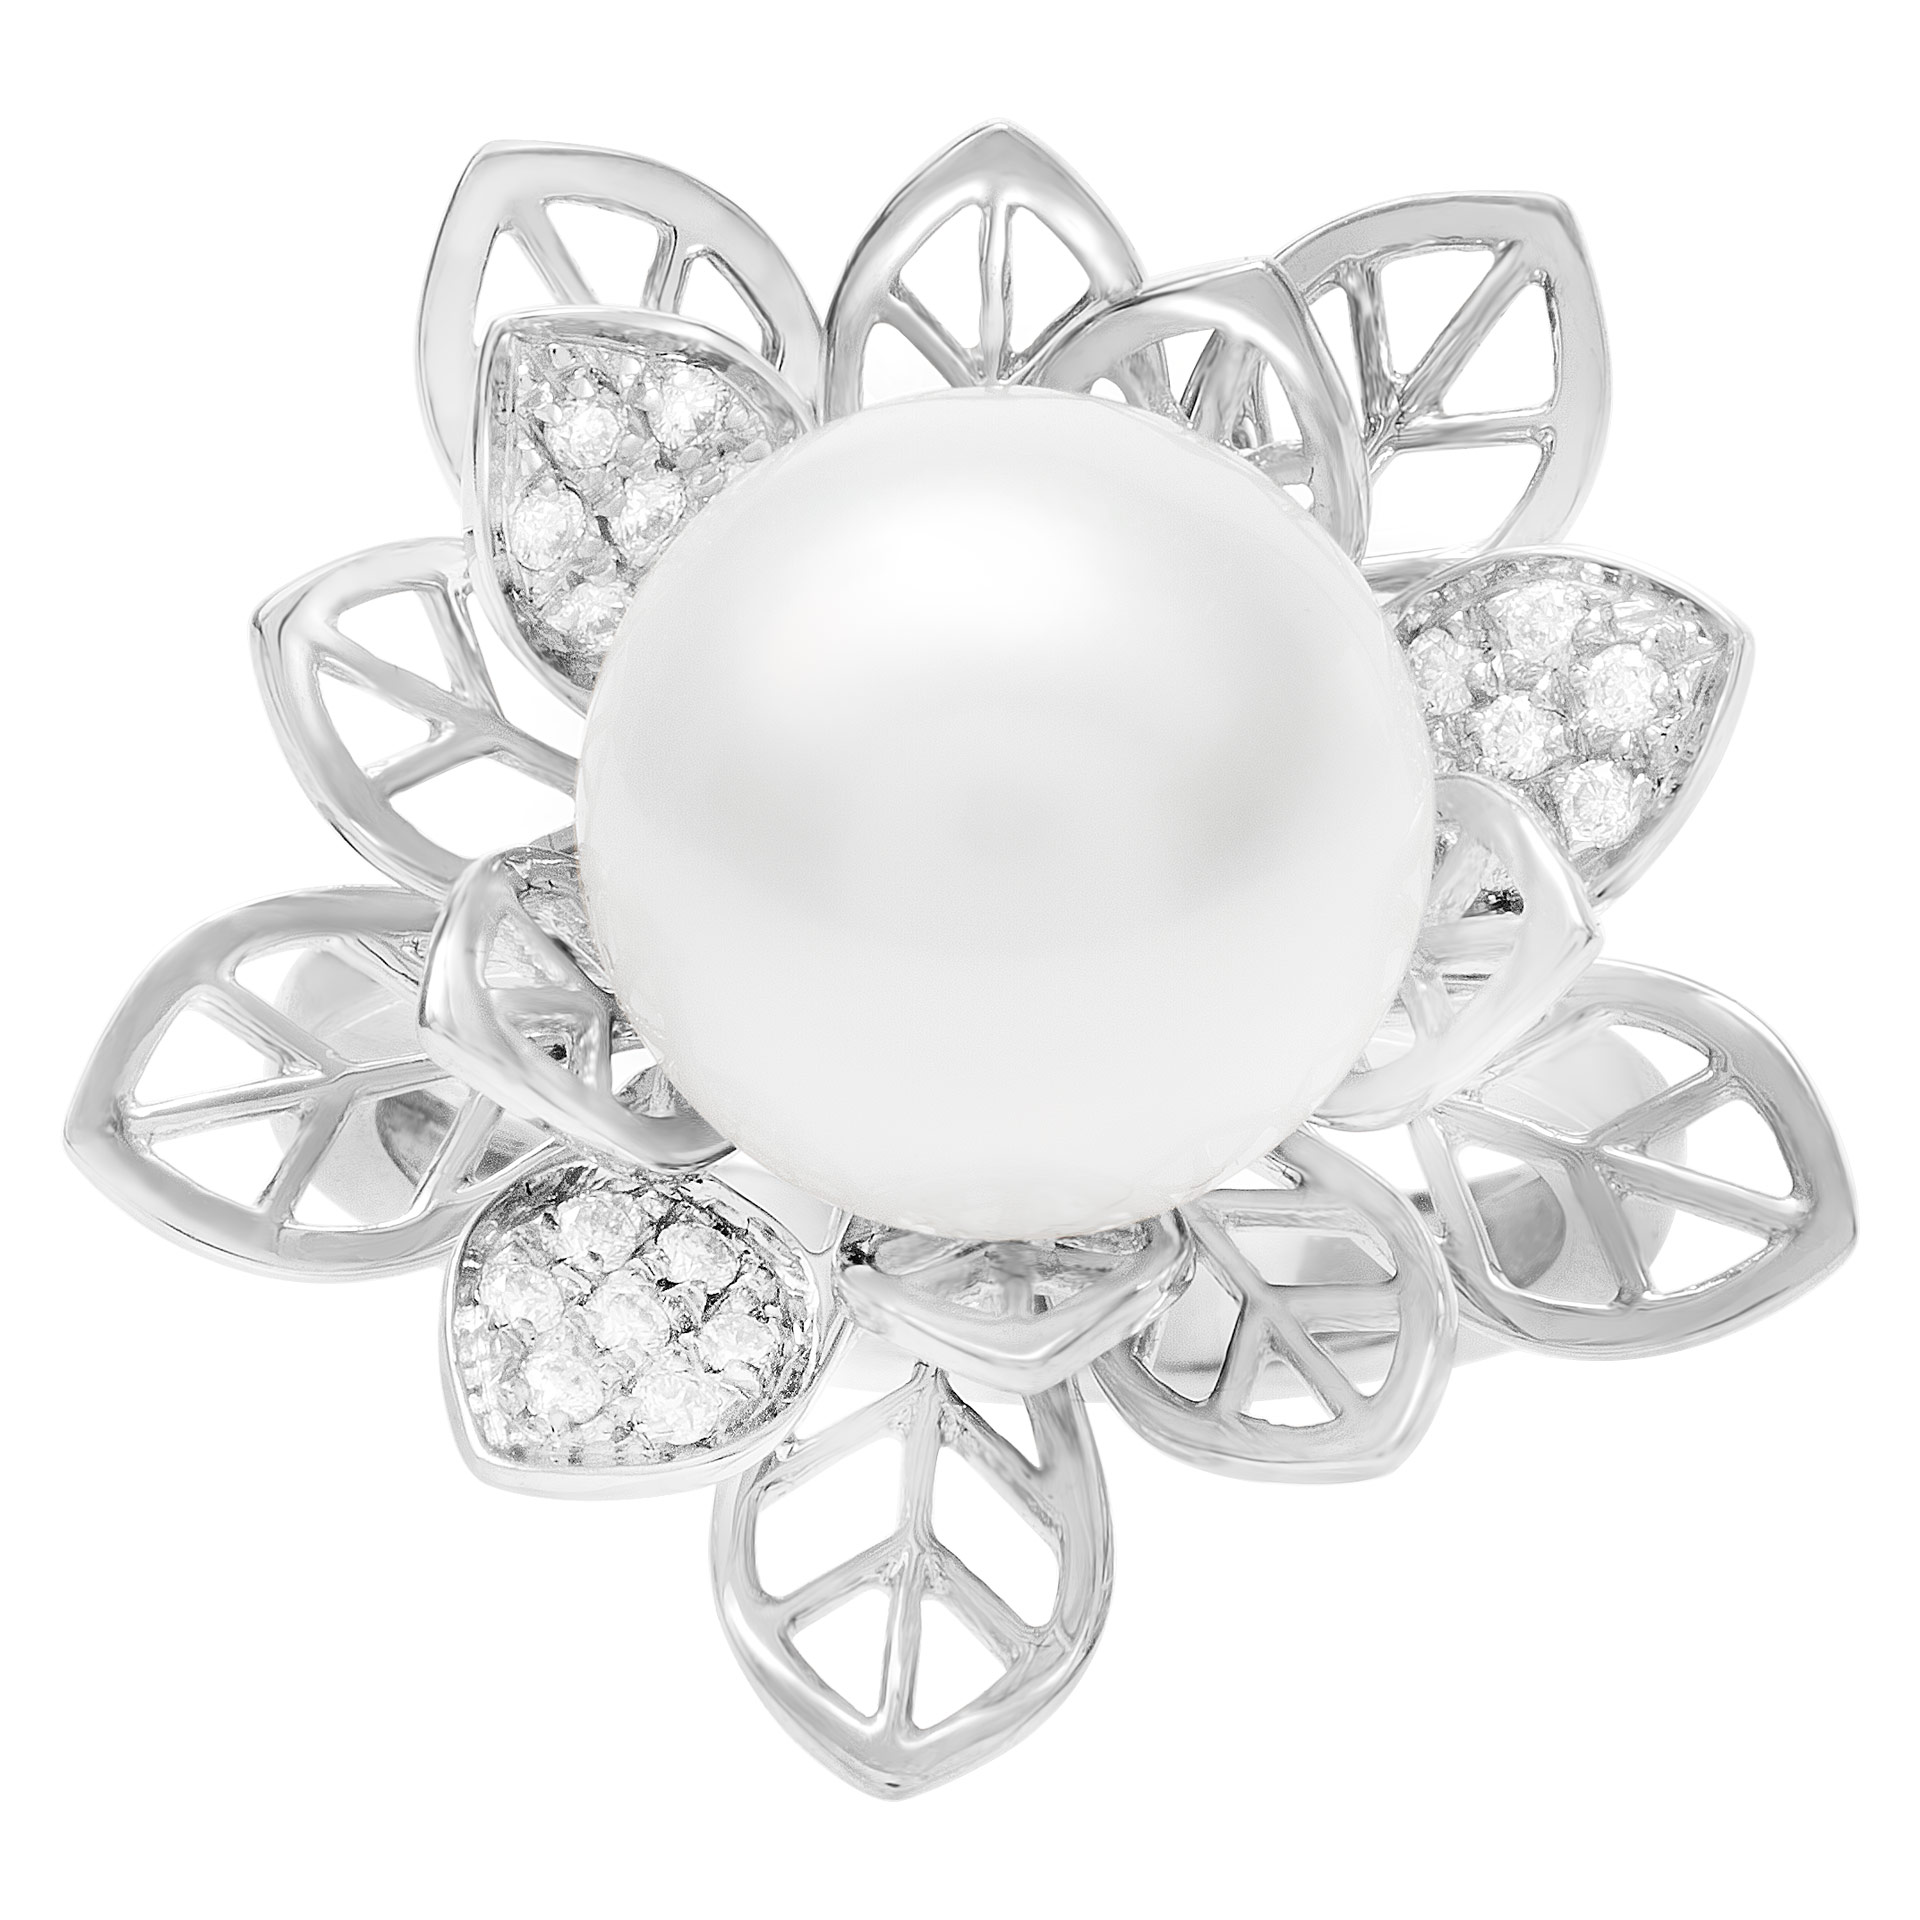 Diamond and pearl floral style ring in 18k white gold. 0.15 carat in diamonds